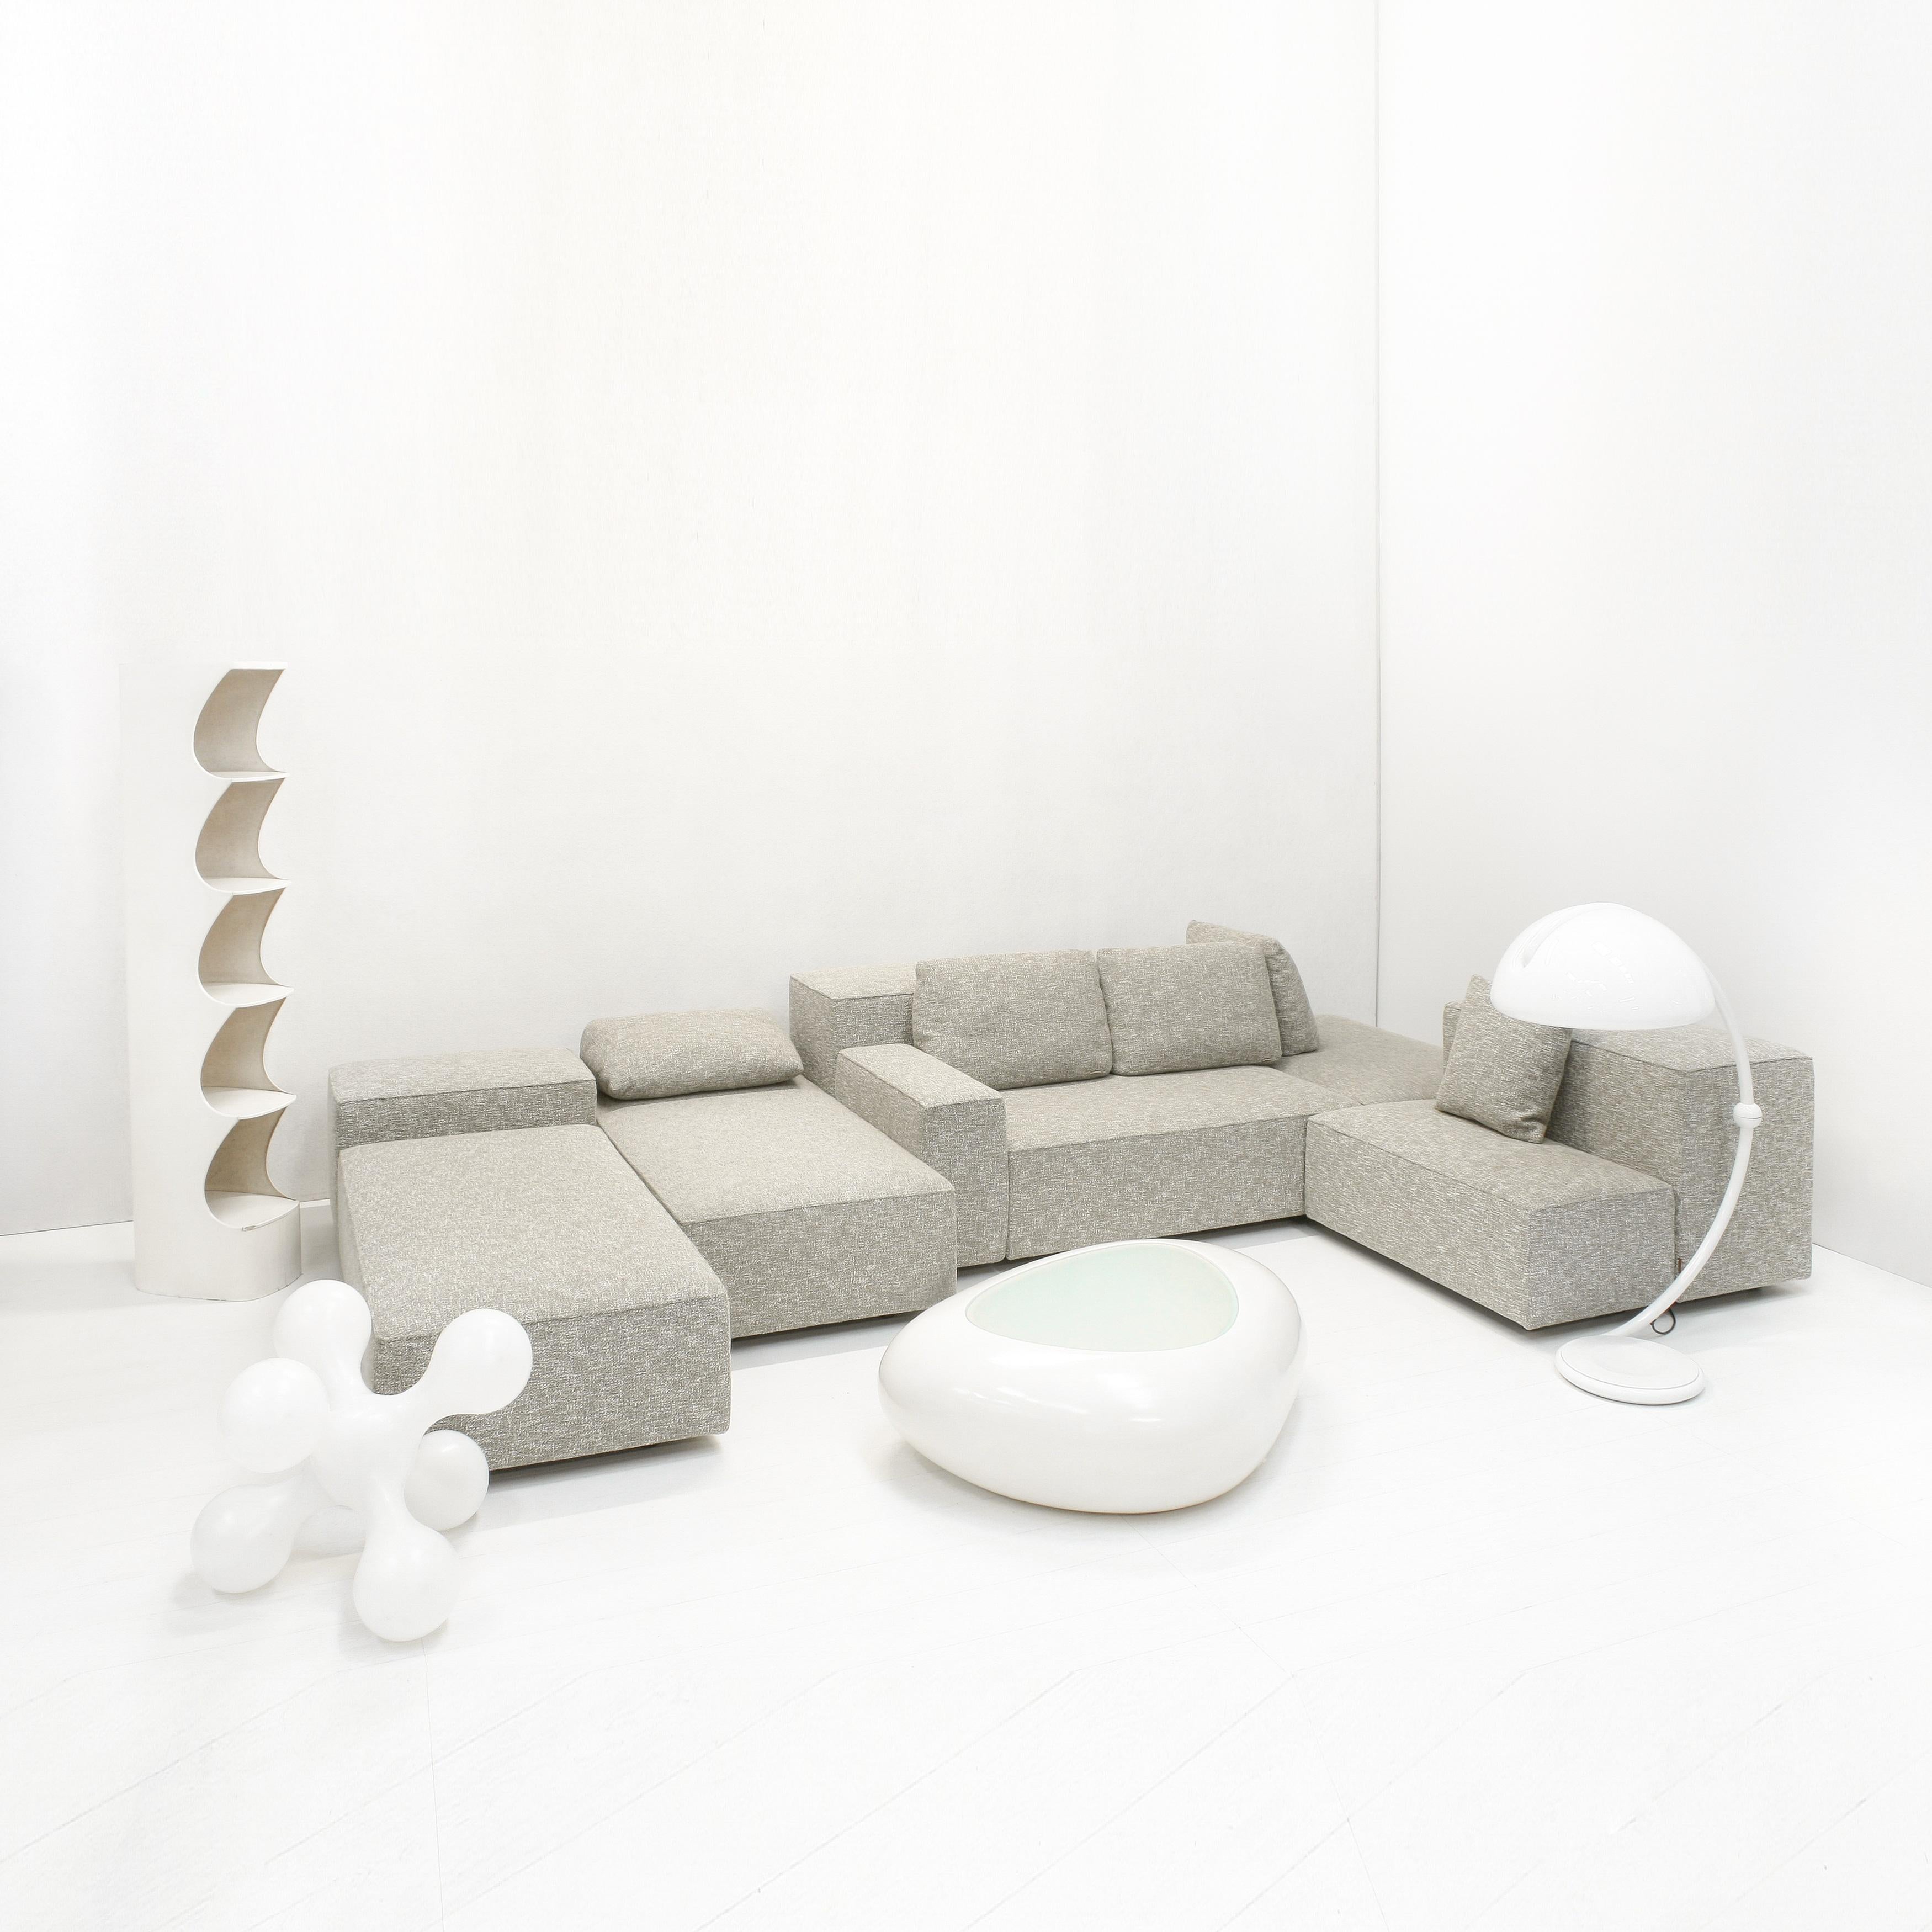 The DOMINO.18 element sofa was designed by Dick Spierenburg for the renowned Dutch company Montis. 

This set contains (LxWxH):
2 elements: 150 x 75 x 40 cm
2 elements: 125 x 75 x 40 cm
1 element: 100 x 50 x 40 cm
1 element: 100 x 50 x 71 cm
1